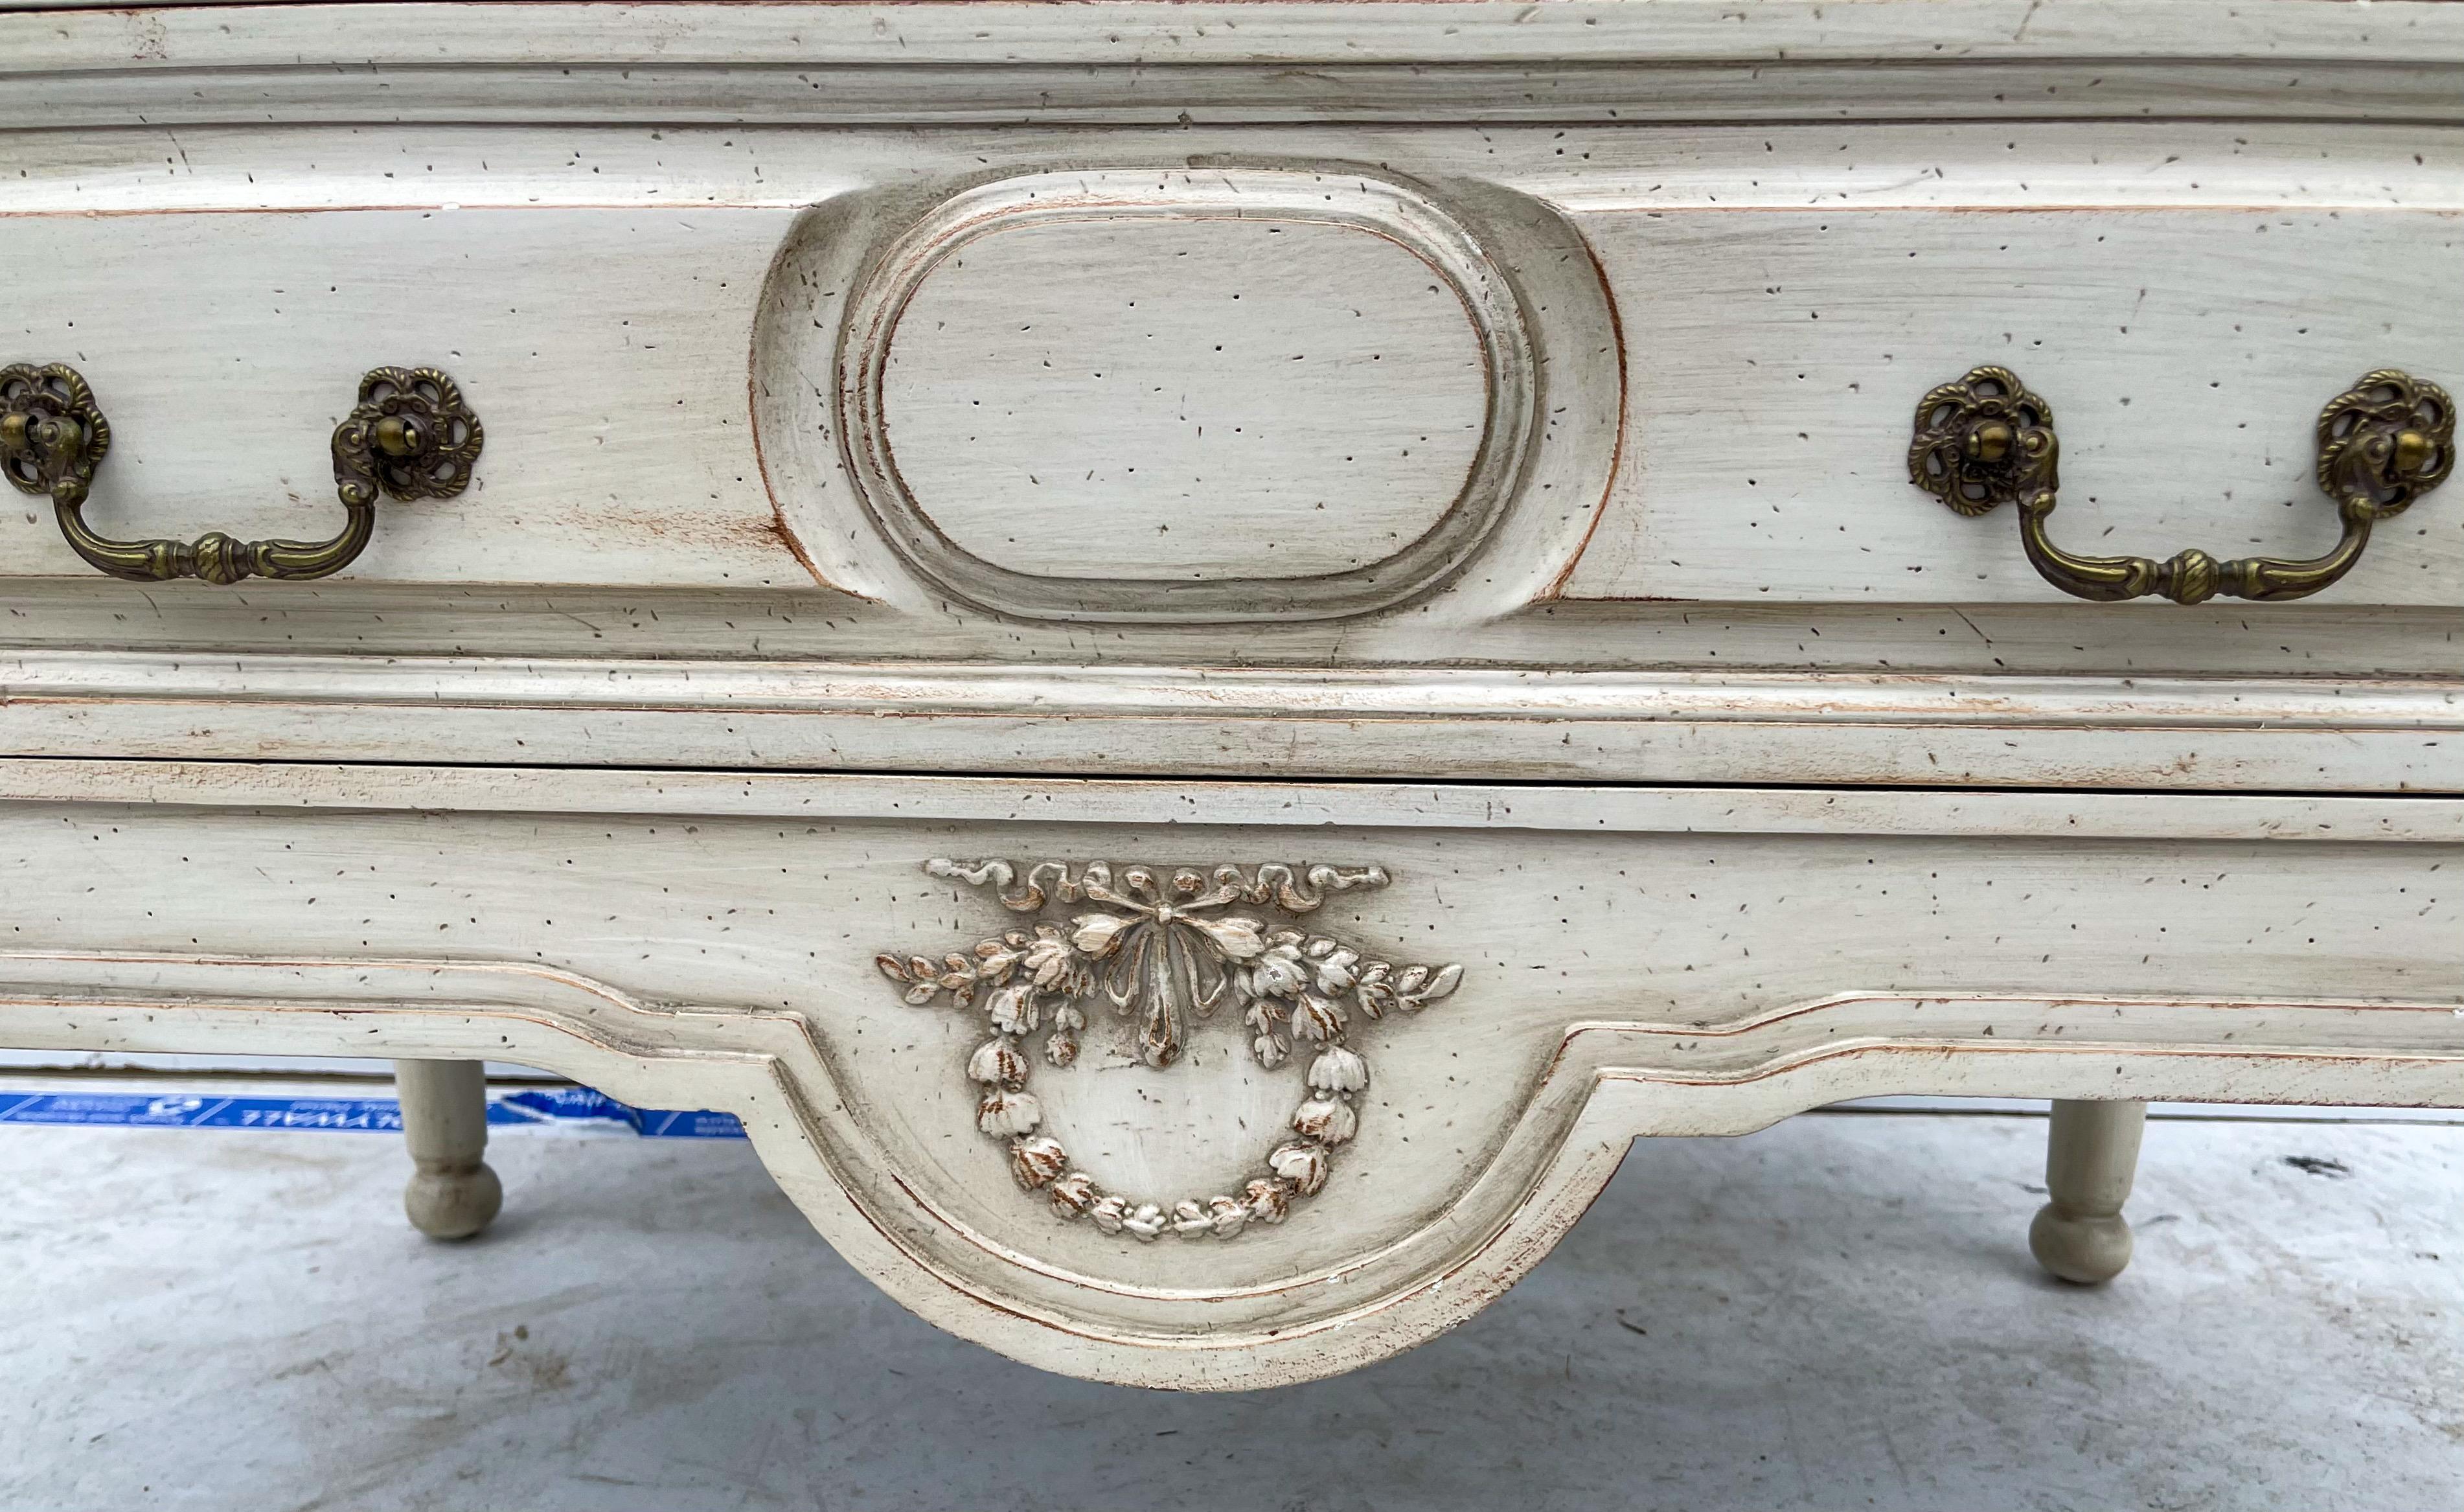 Late 20th Century Late 20th-C. Custom French Neo-Classical Style Painted Chests / Side Tables - 2 For Sale